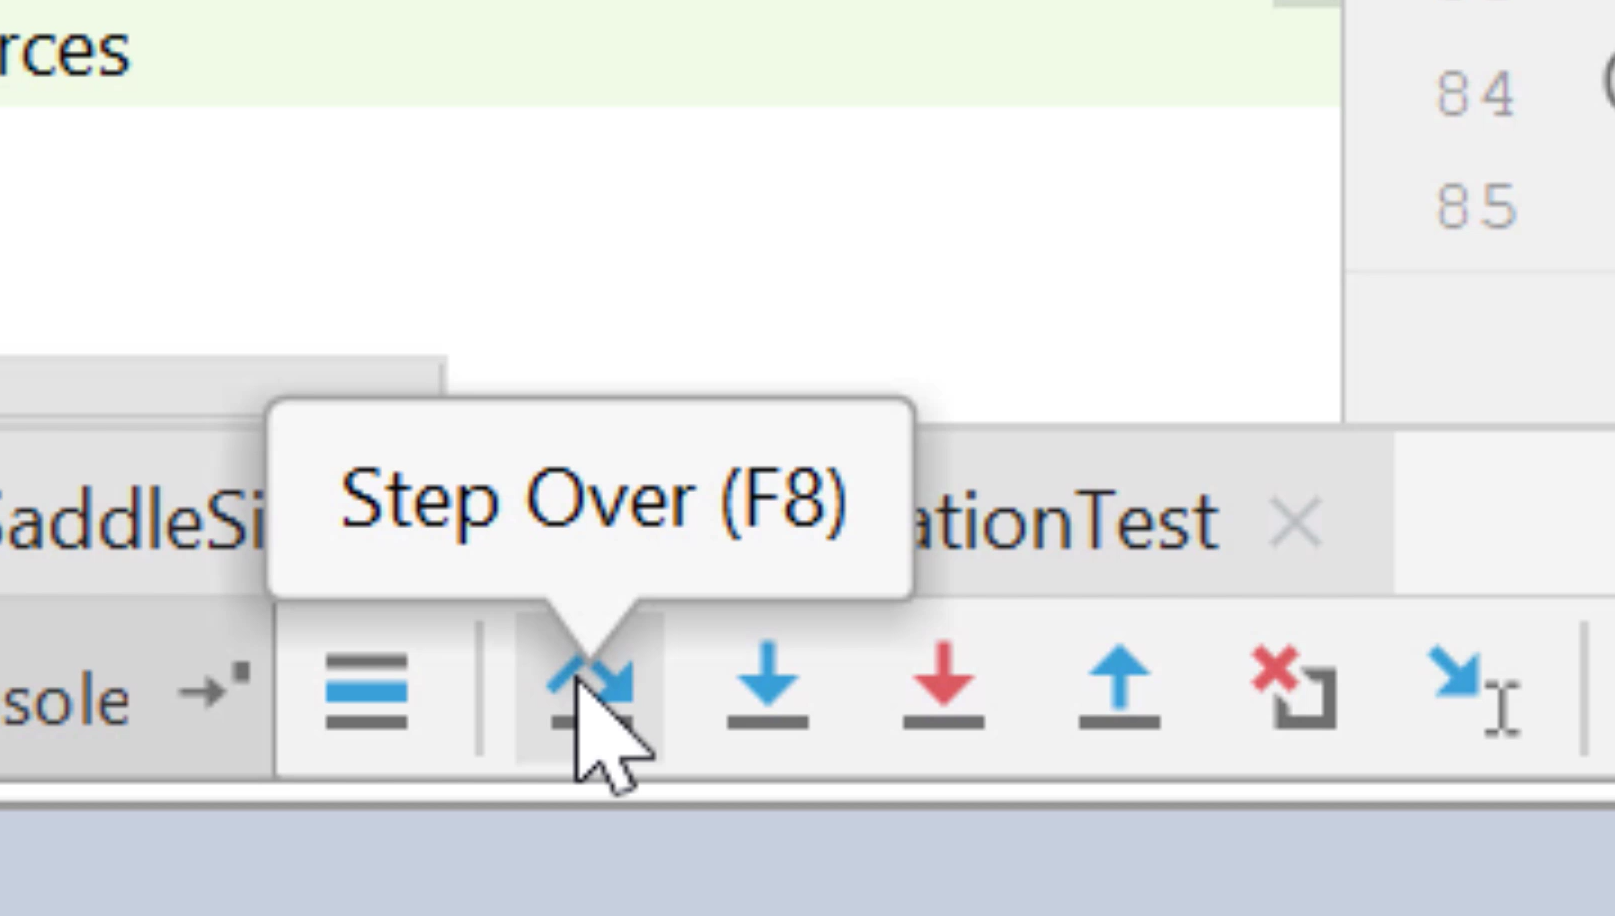 The Step Over button allows you to resume execution, but immediately suspend the JVM on the next line.